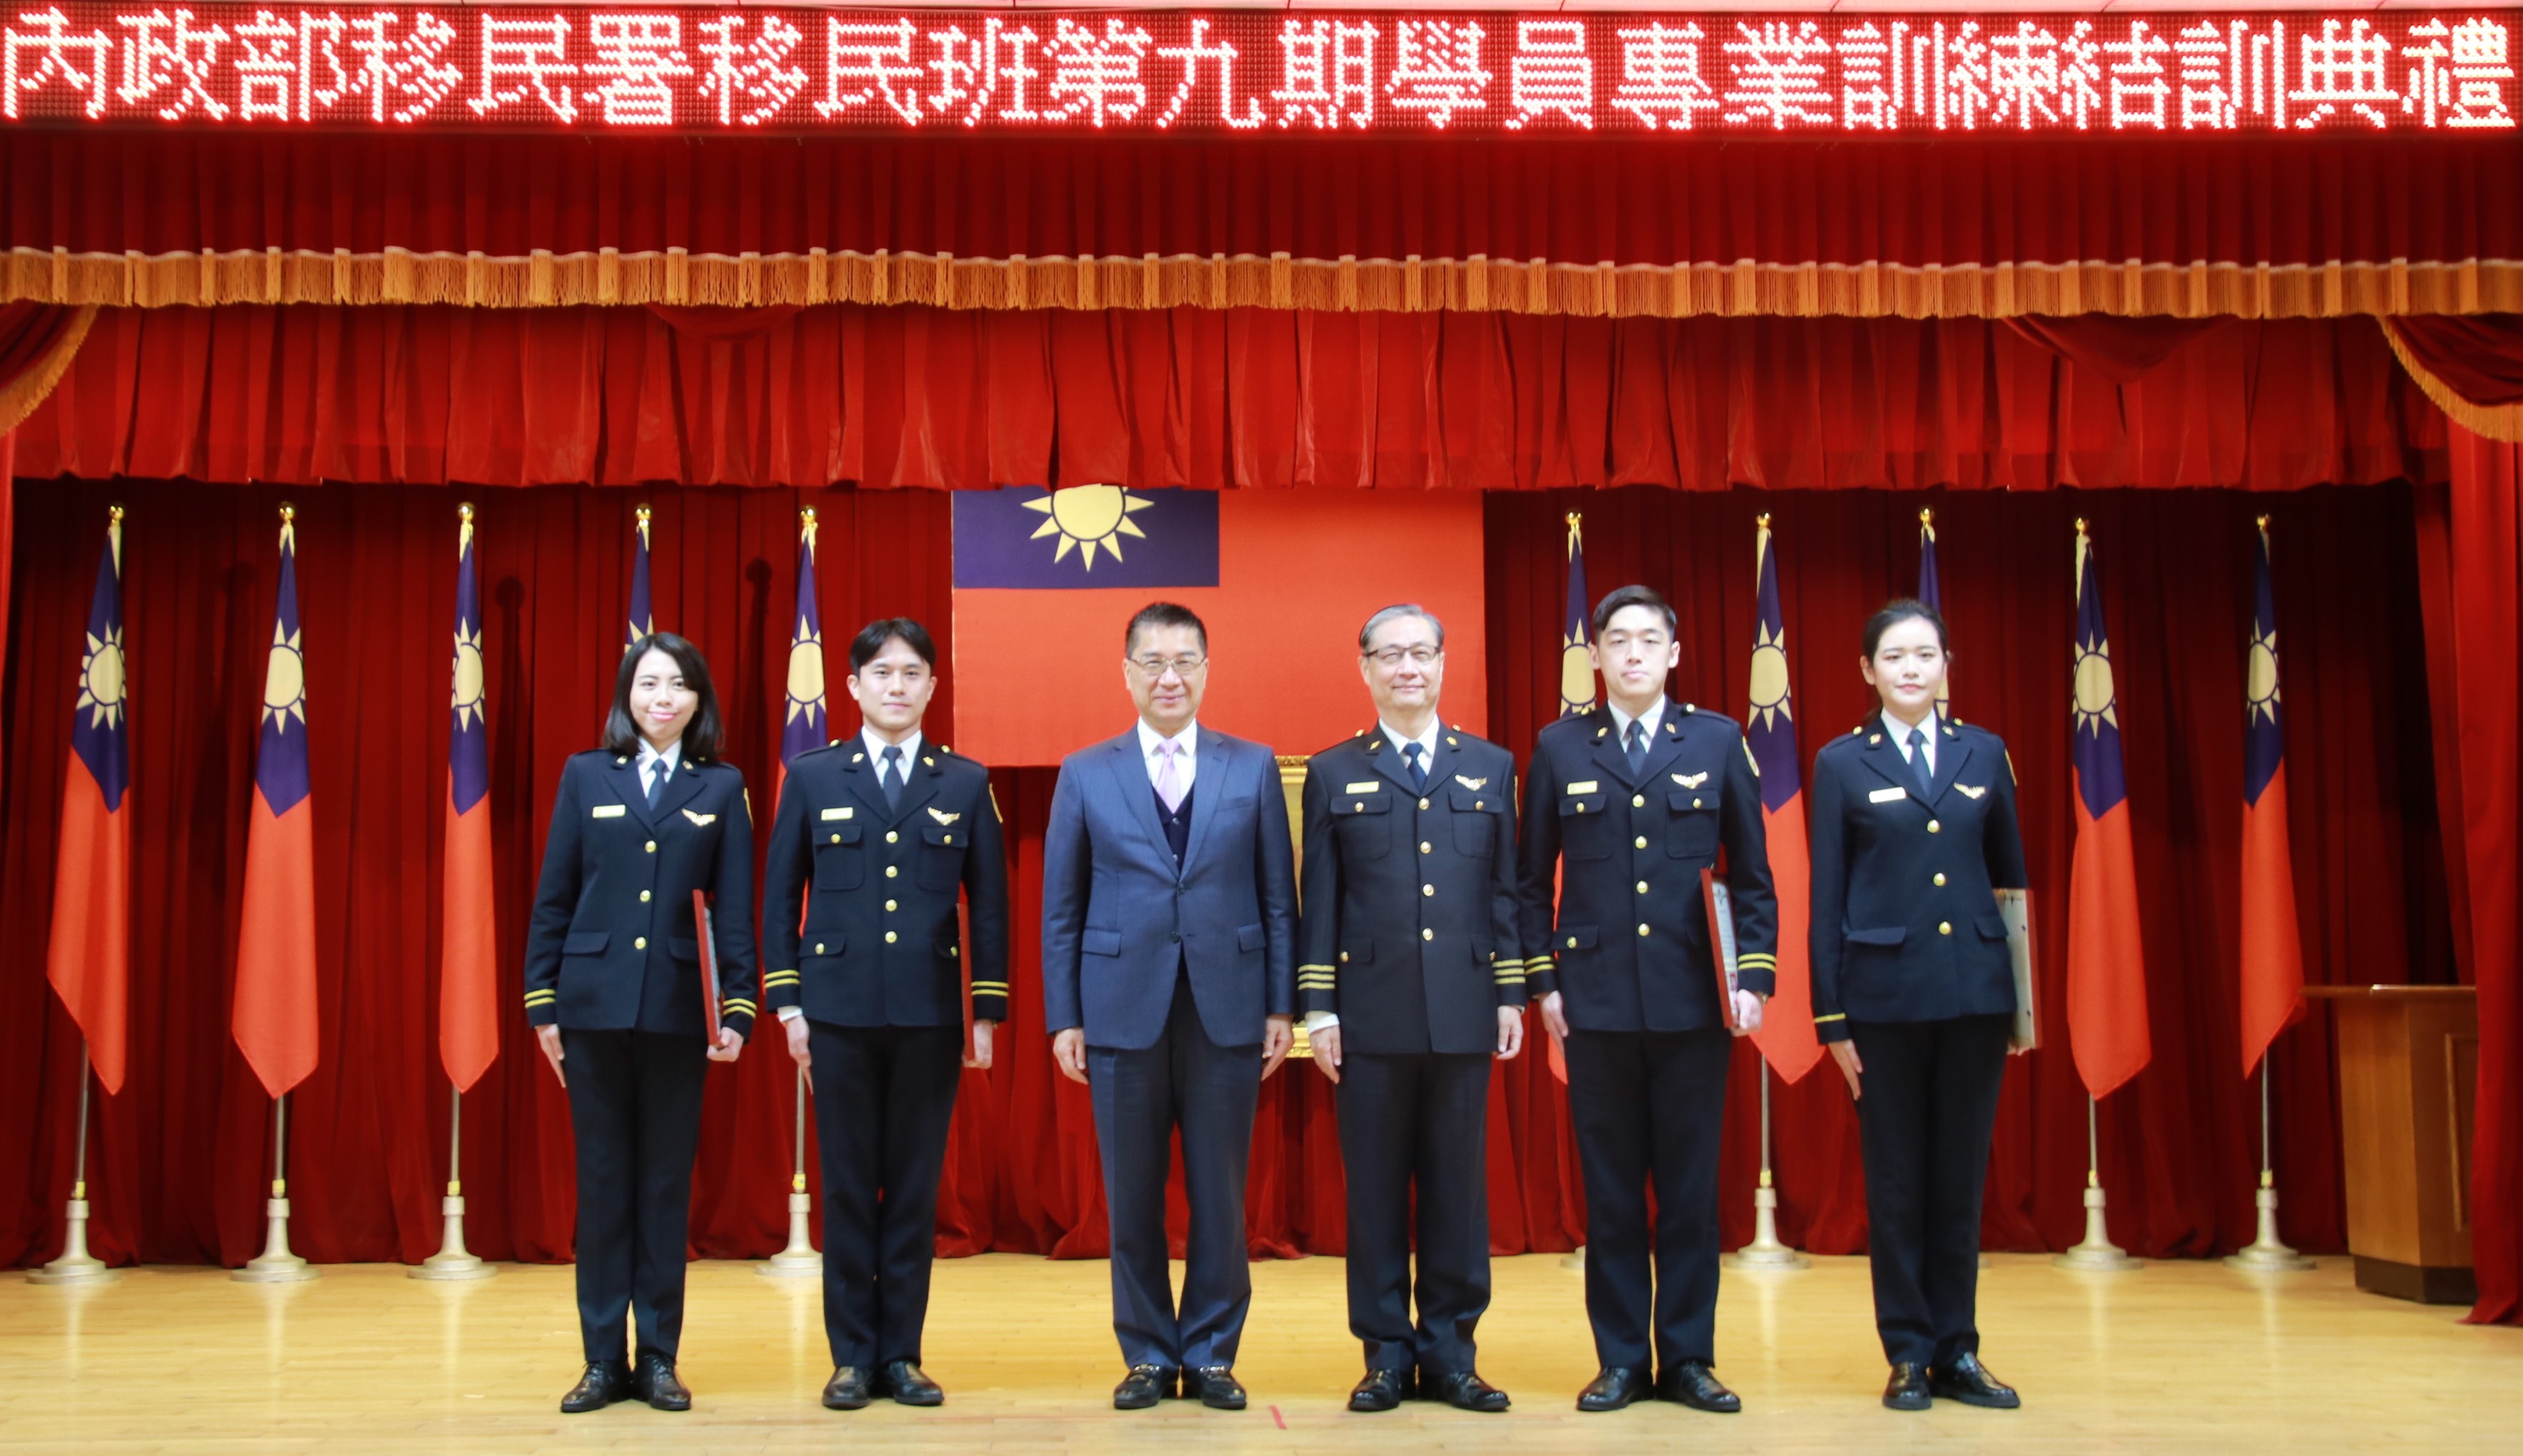 The Minister of the Interior Hsu Kuo-Yung (3rd from left), the Director of the NIA Zhong Jing Kun (4th from left) took a photo with outstanding immigration officers. (Photo / Provided by the NIA)